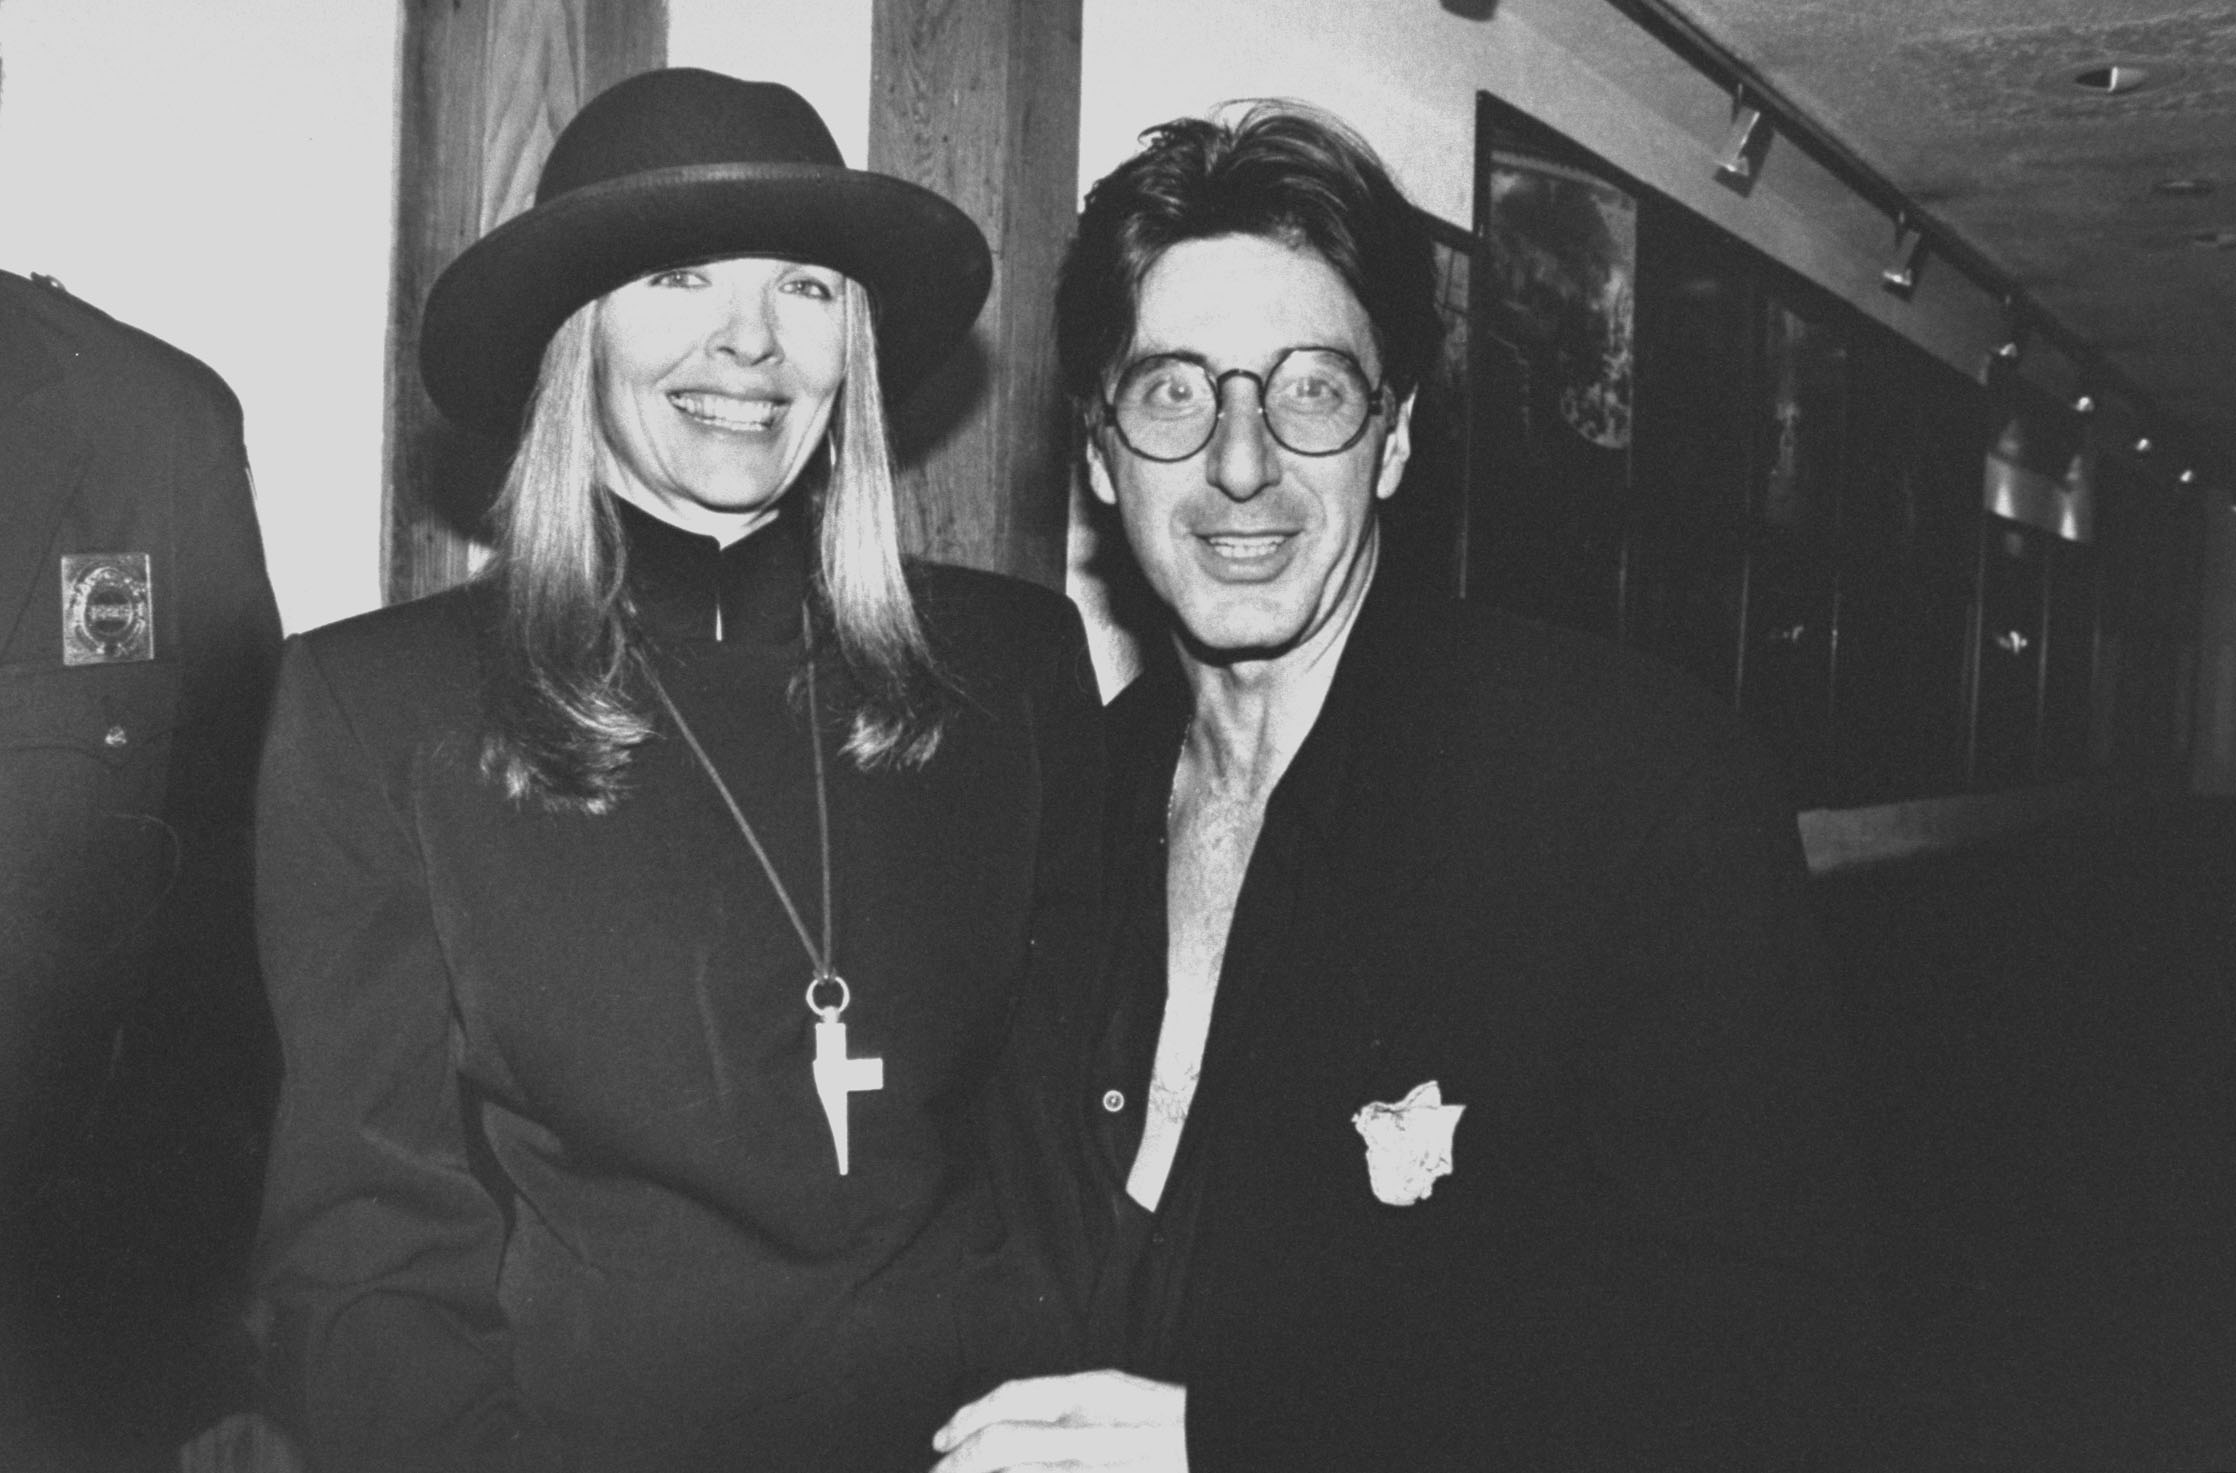 Al Pacino with Diane Keaton at the screening of his movie, "Sea of Love" | Source: Getty Images